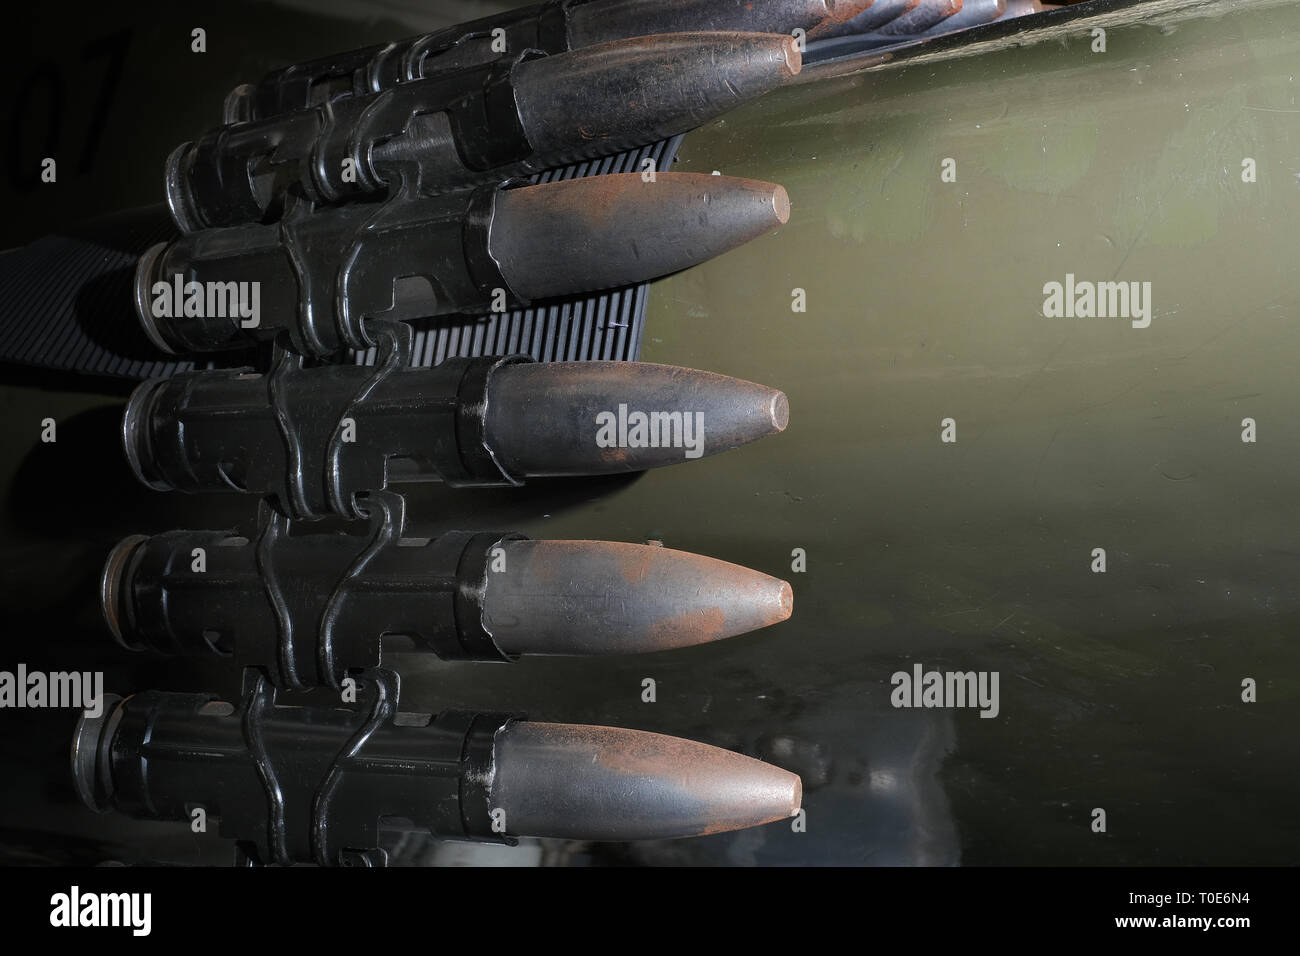 30 mm cannon shells in link ready to load into fast jet fighter aircraft weapon system. Stock Photo